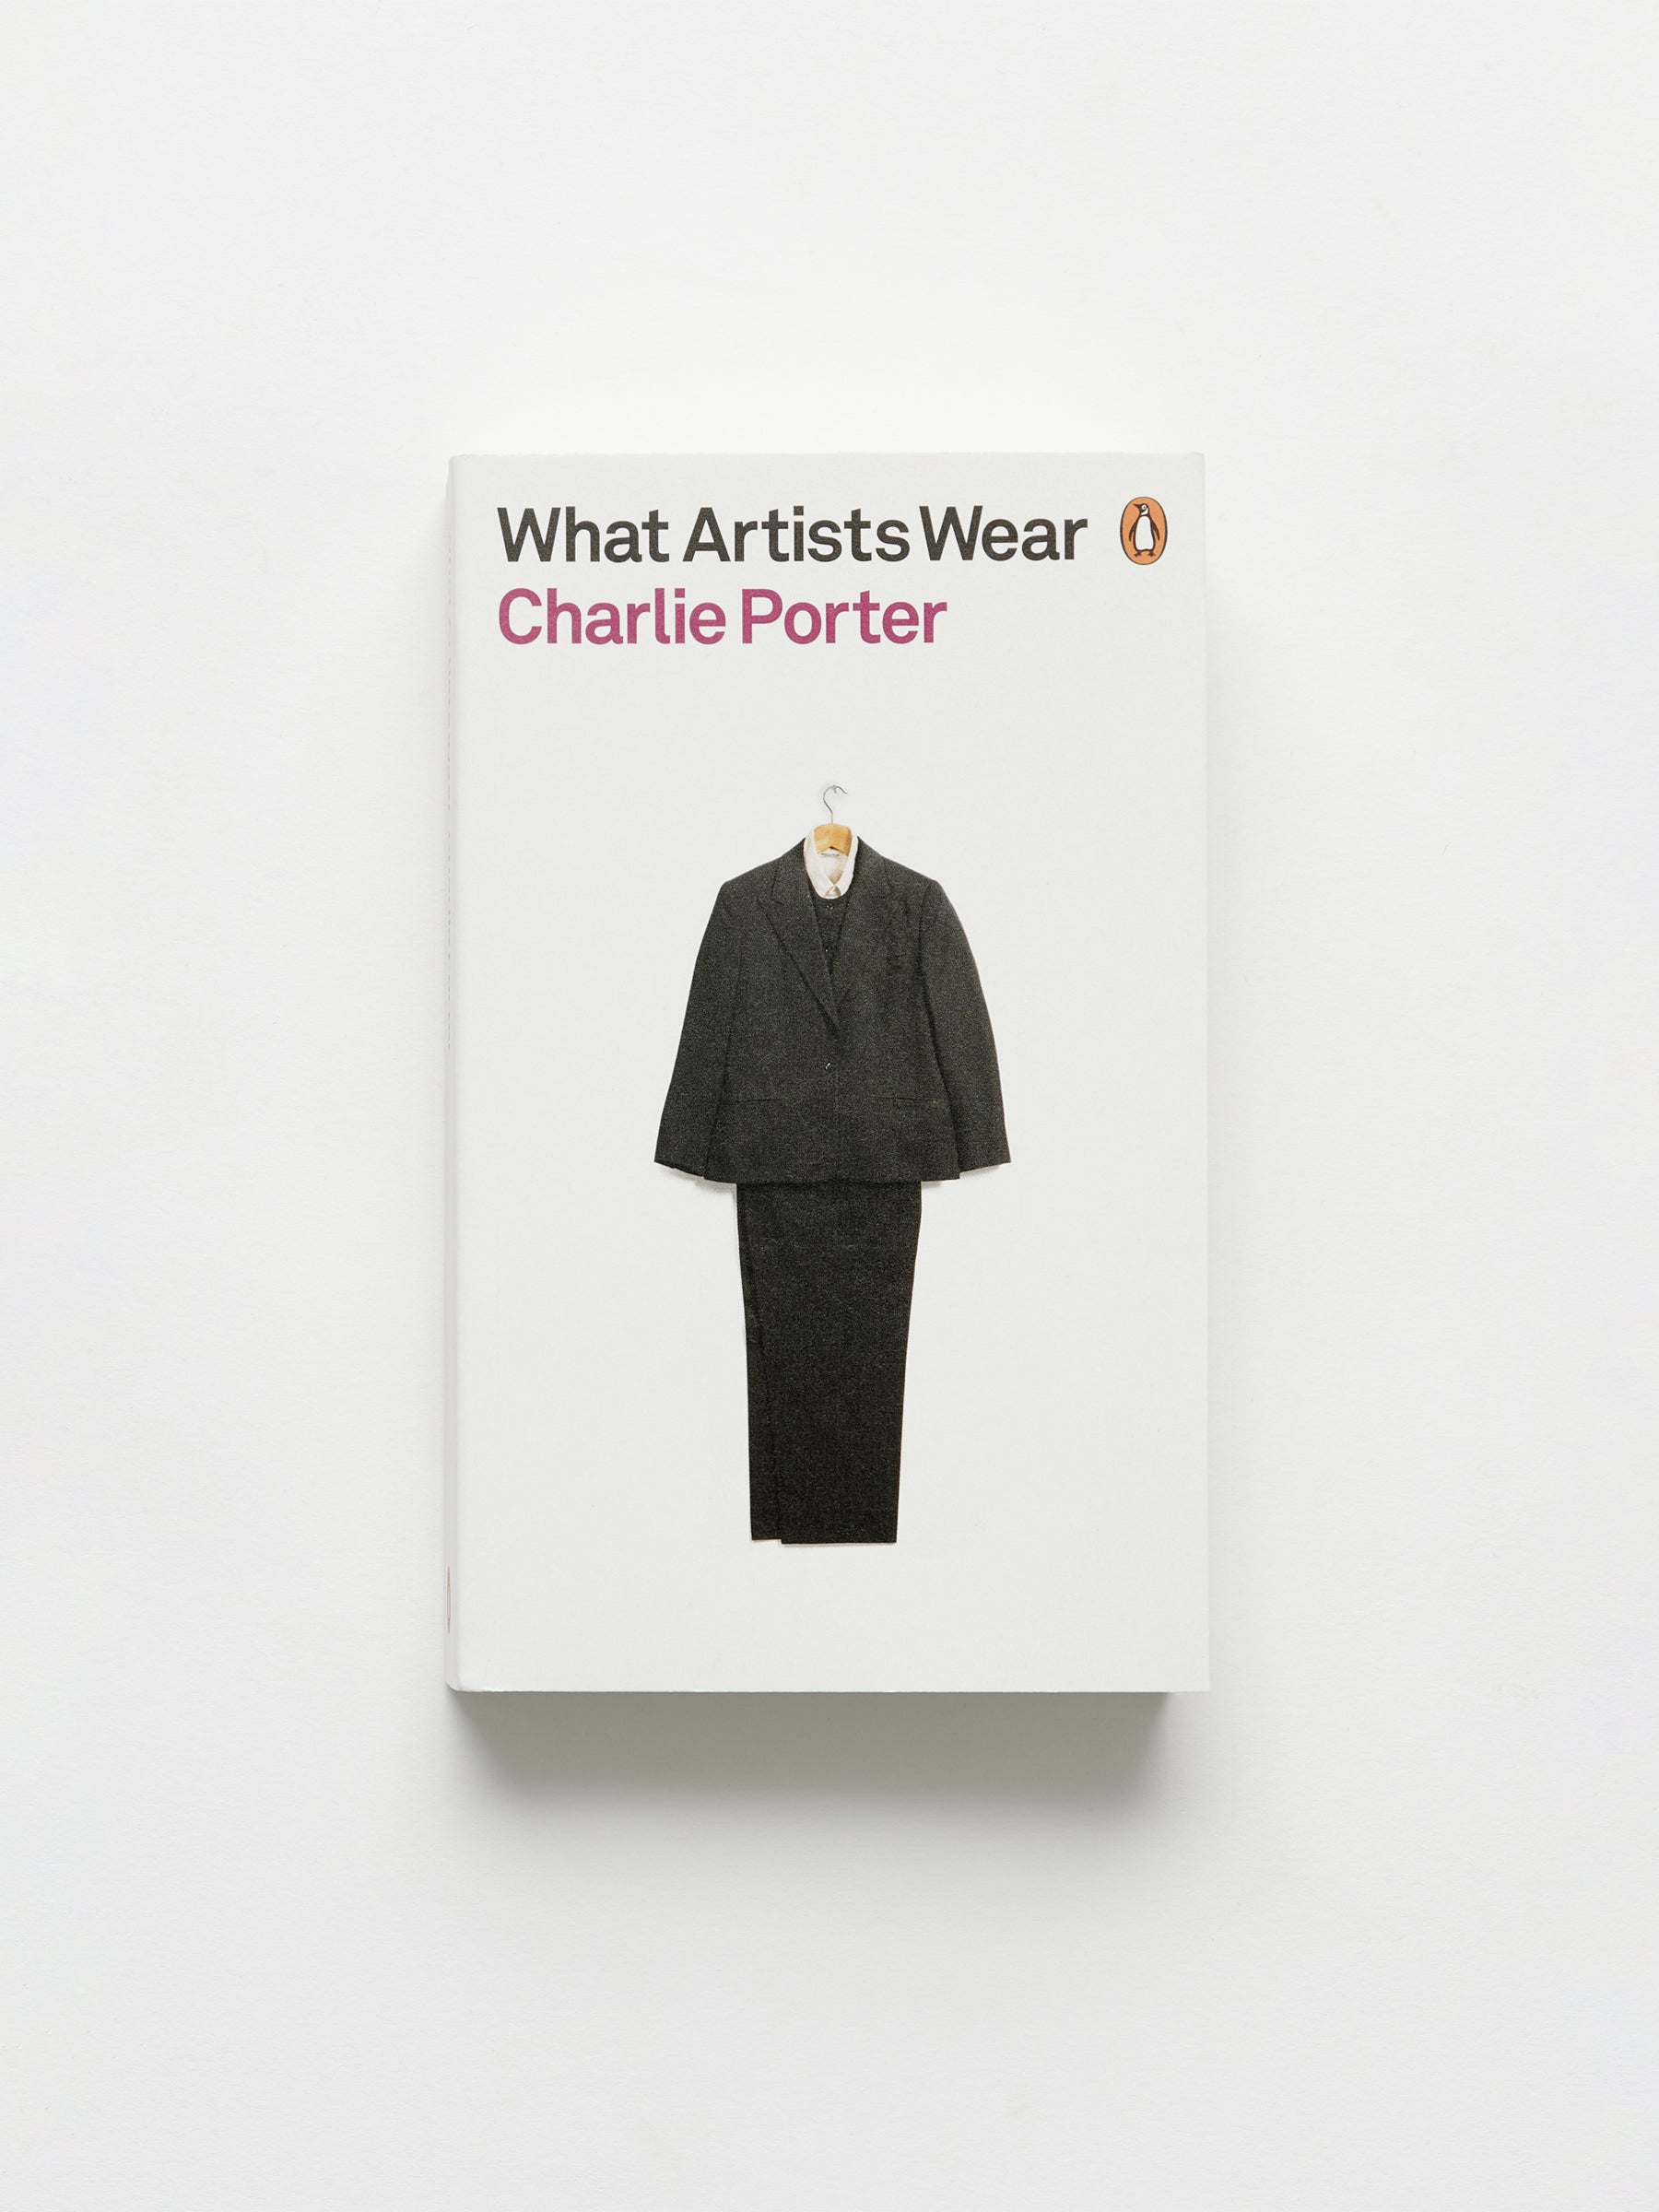 What Artists Wear by Charlie Porter